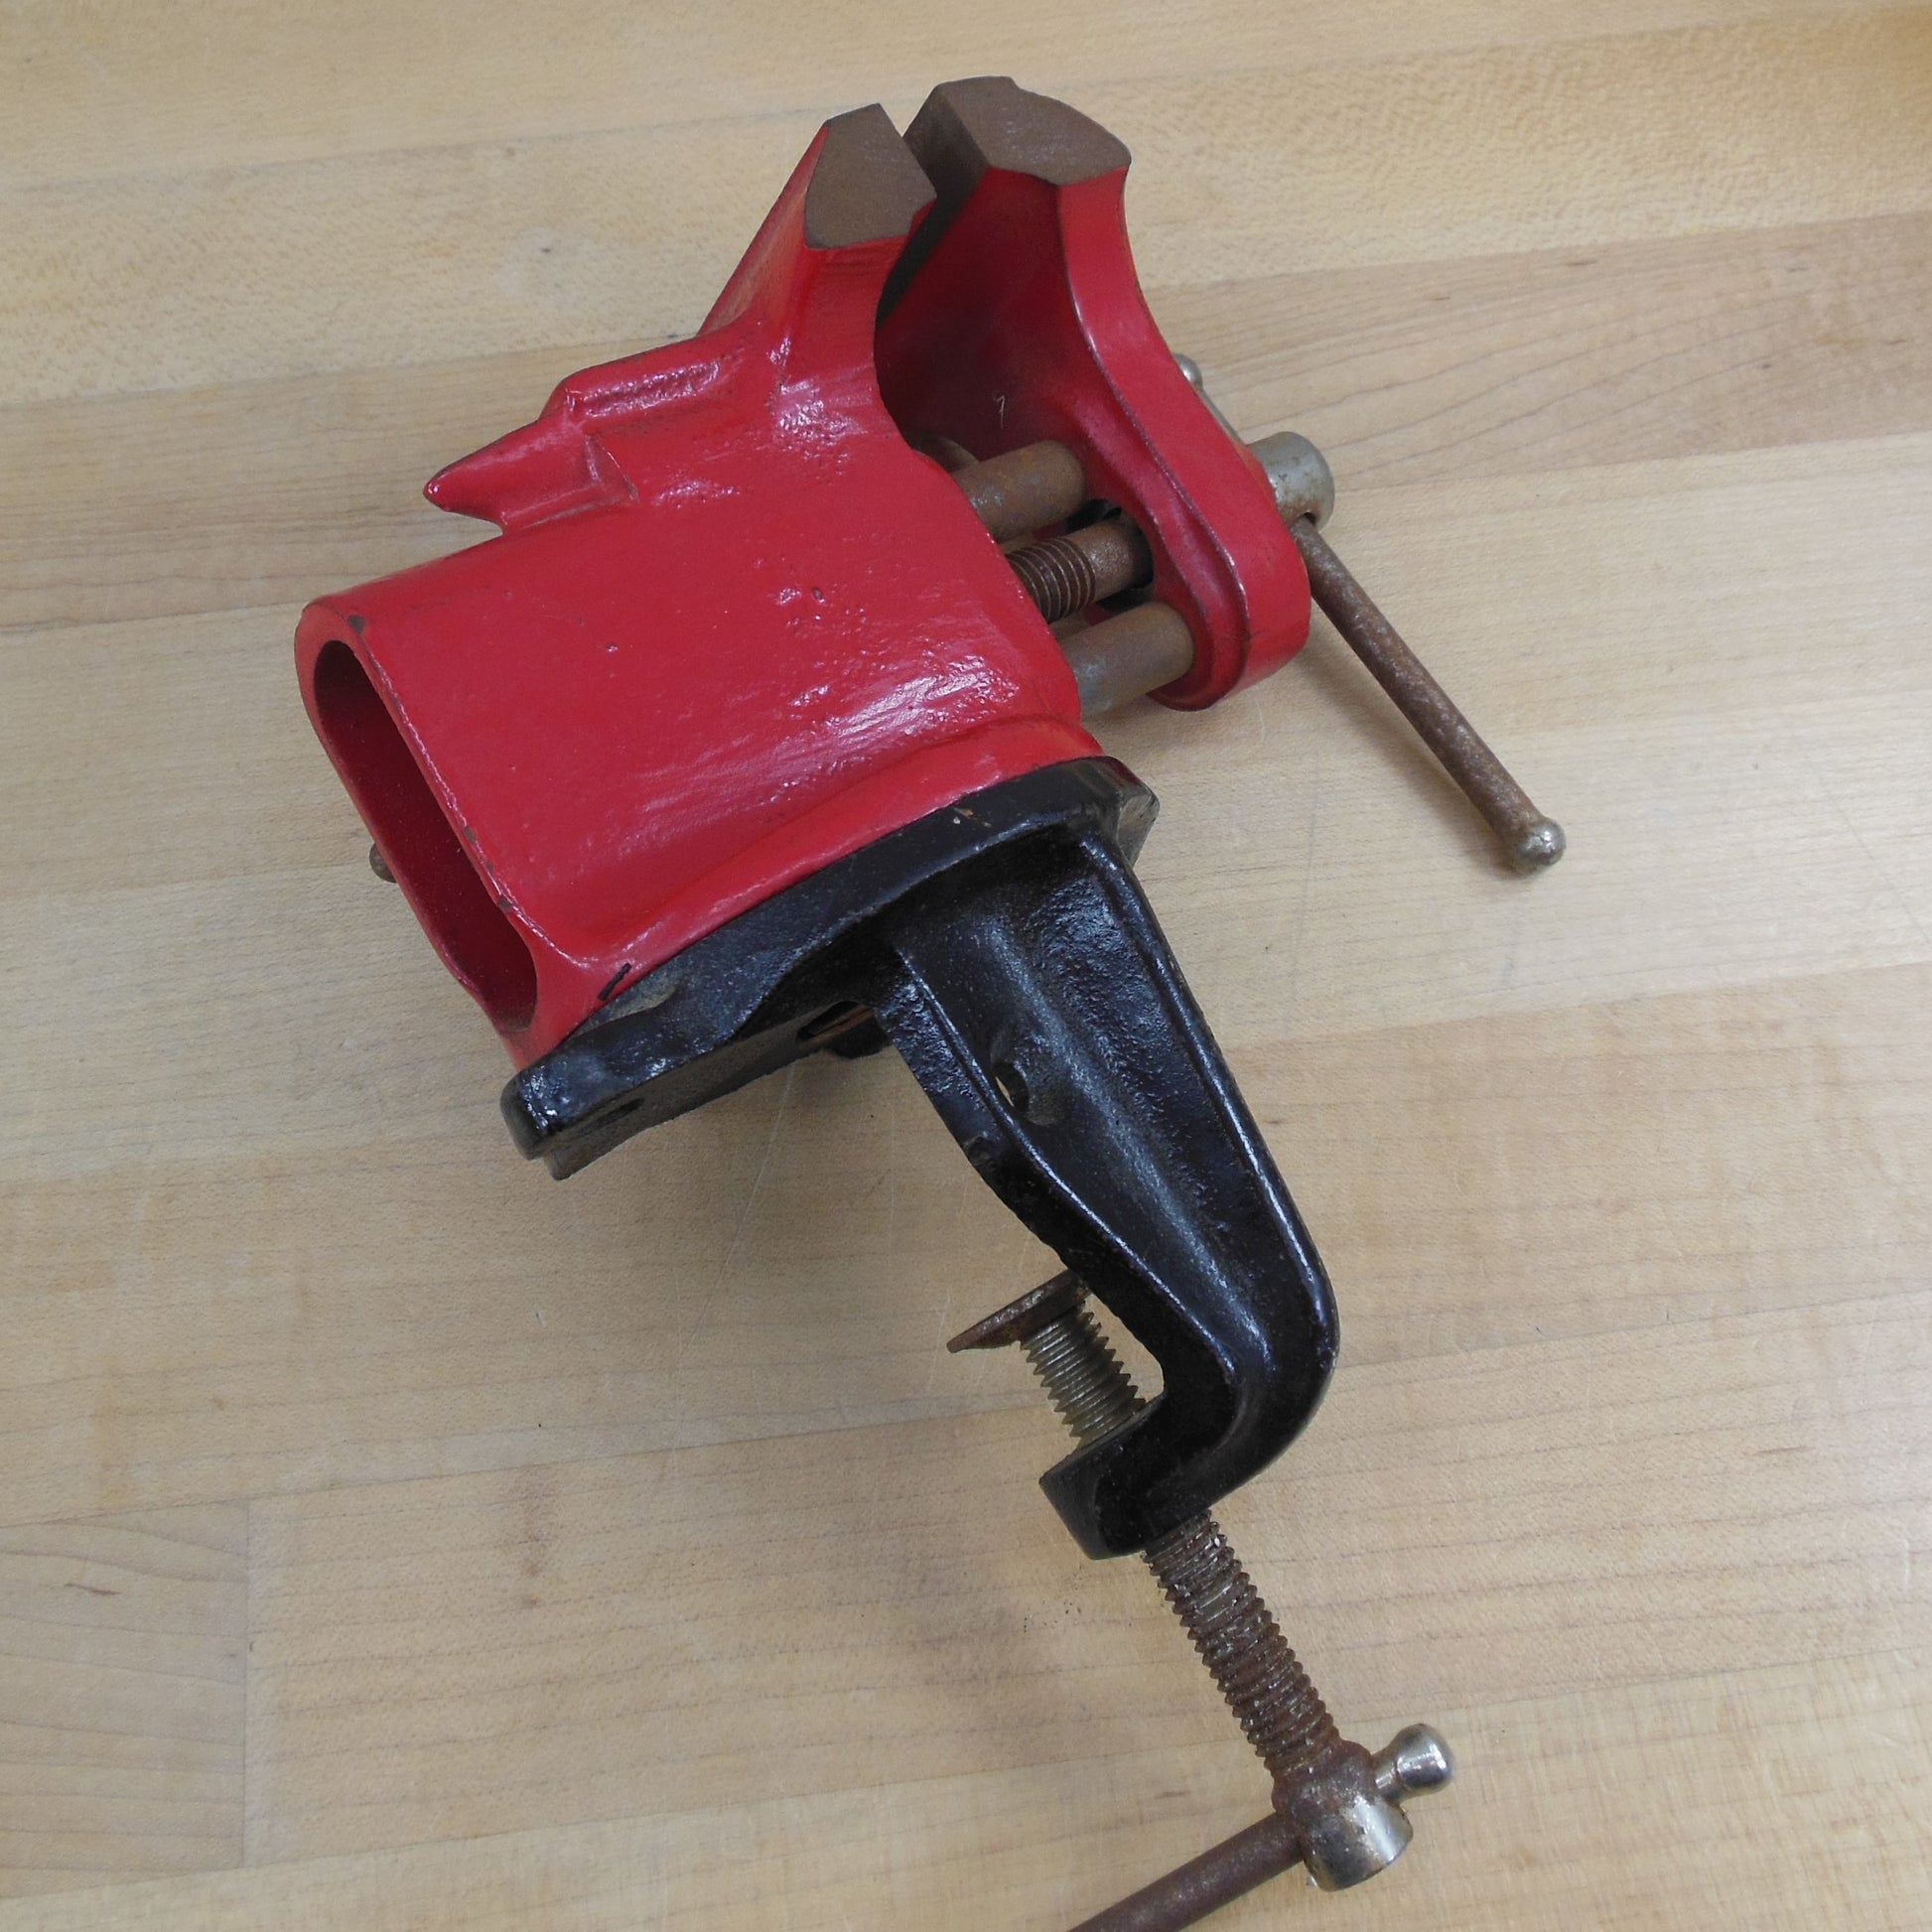 Unbranded Small Clamp On Bench Vise 2-1/2" Jaws Red Black vintage